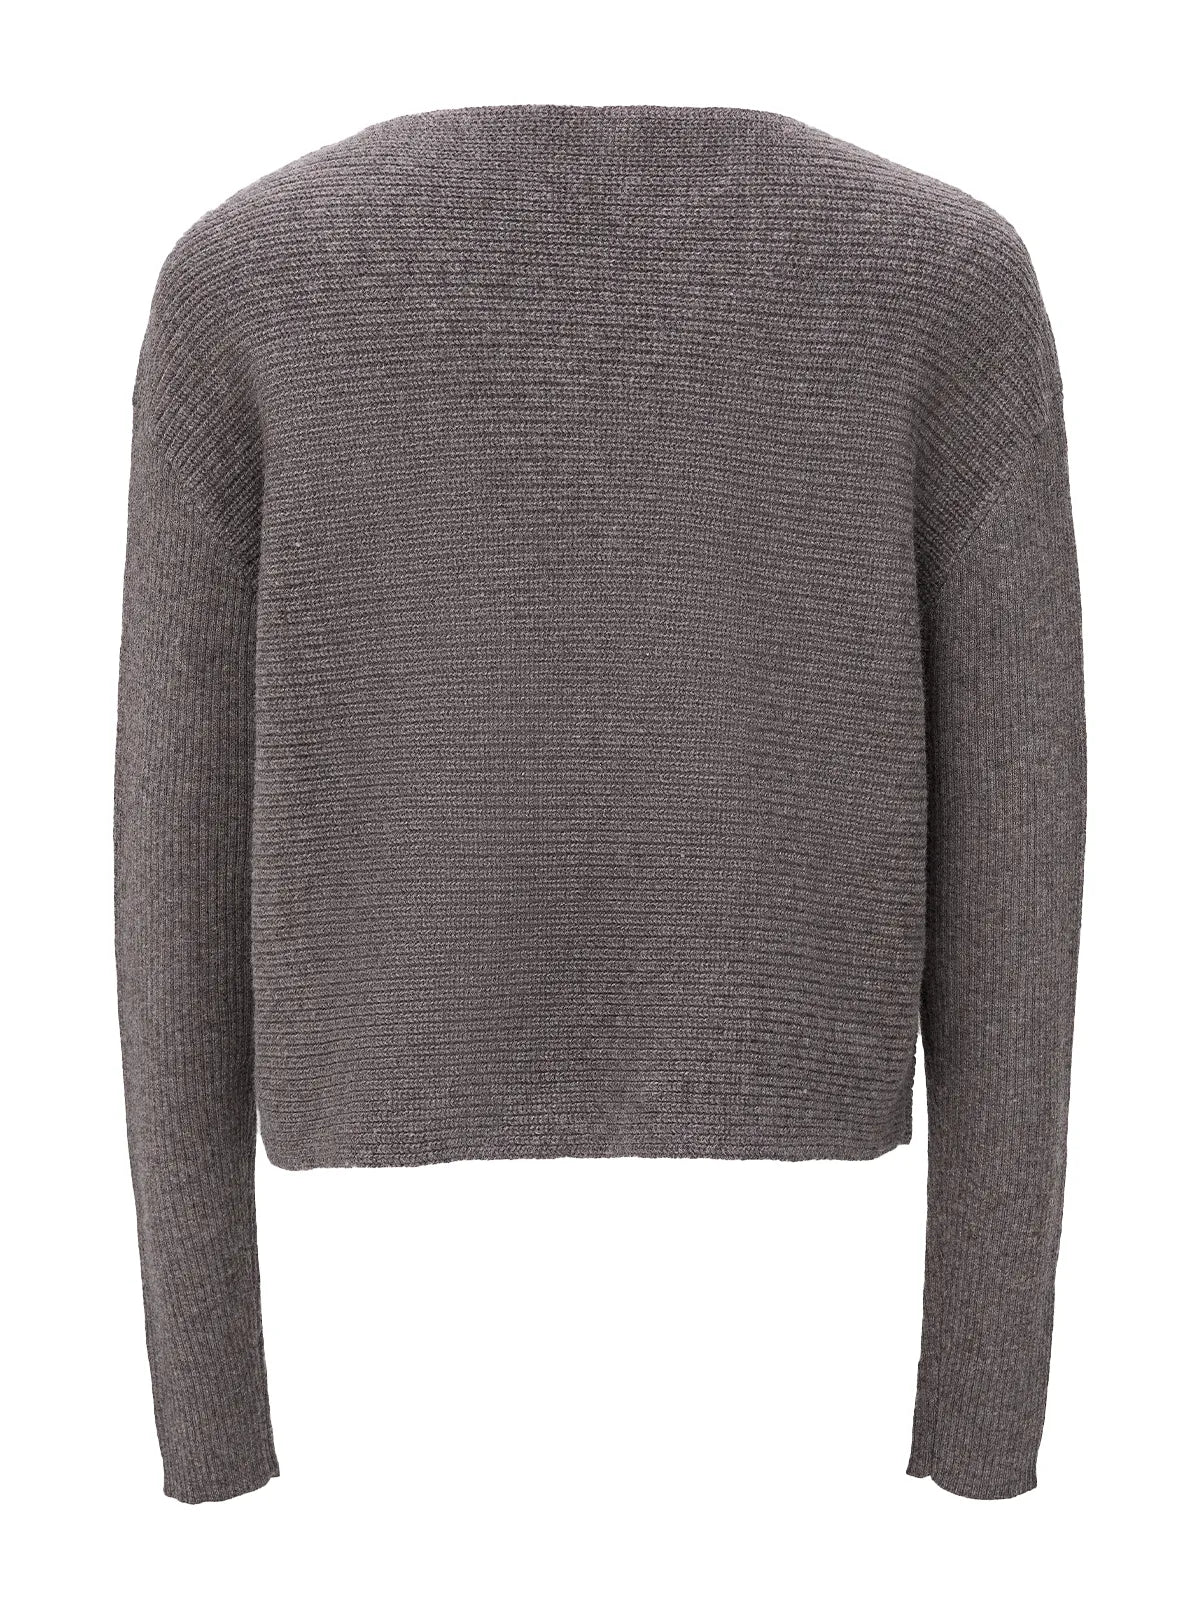 Casual and chic short wool sweater with a classic round neck